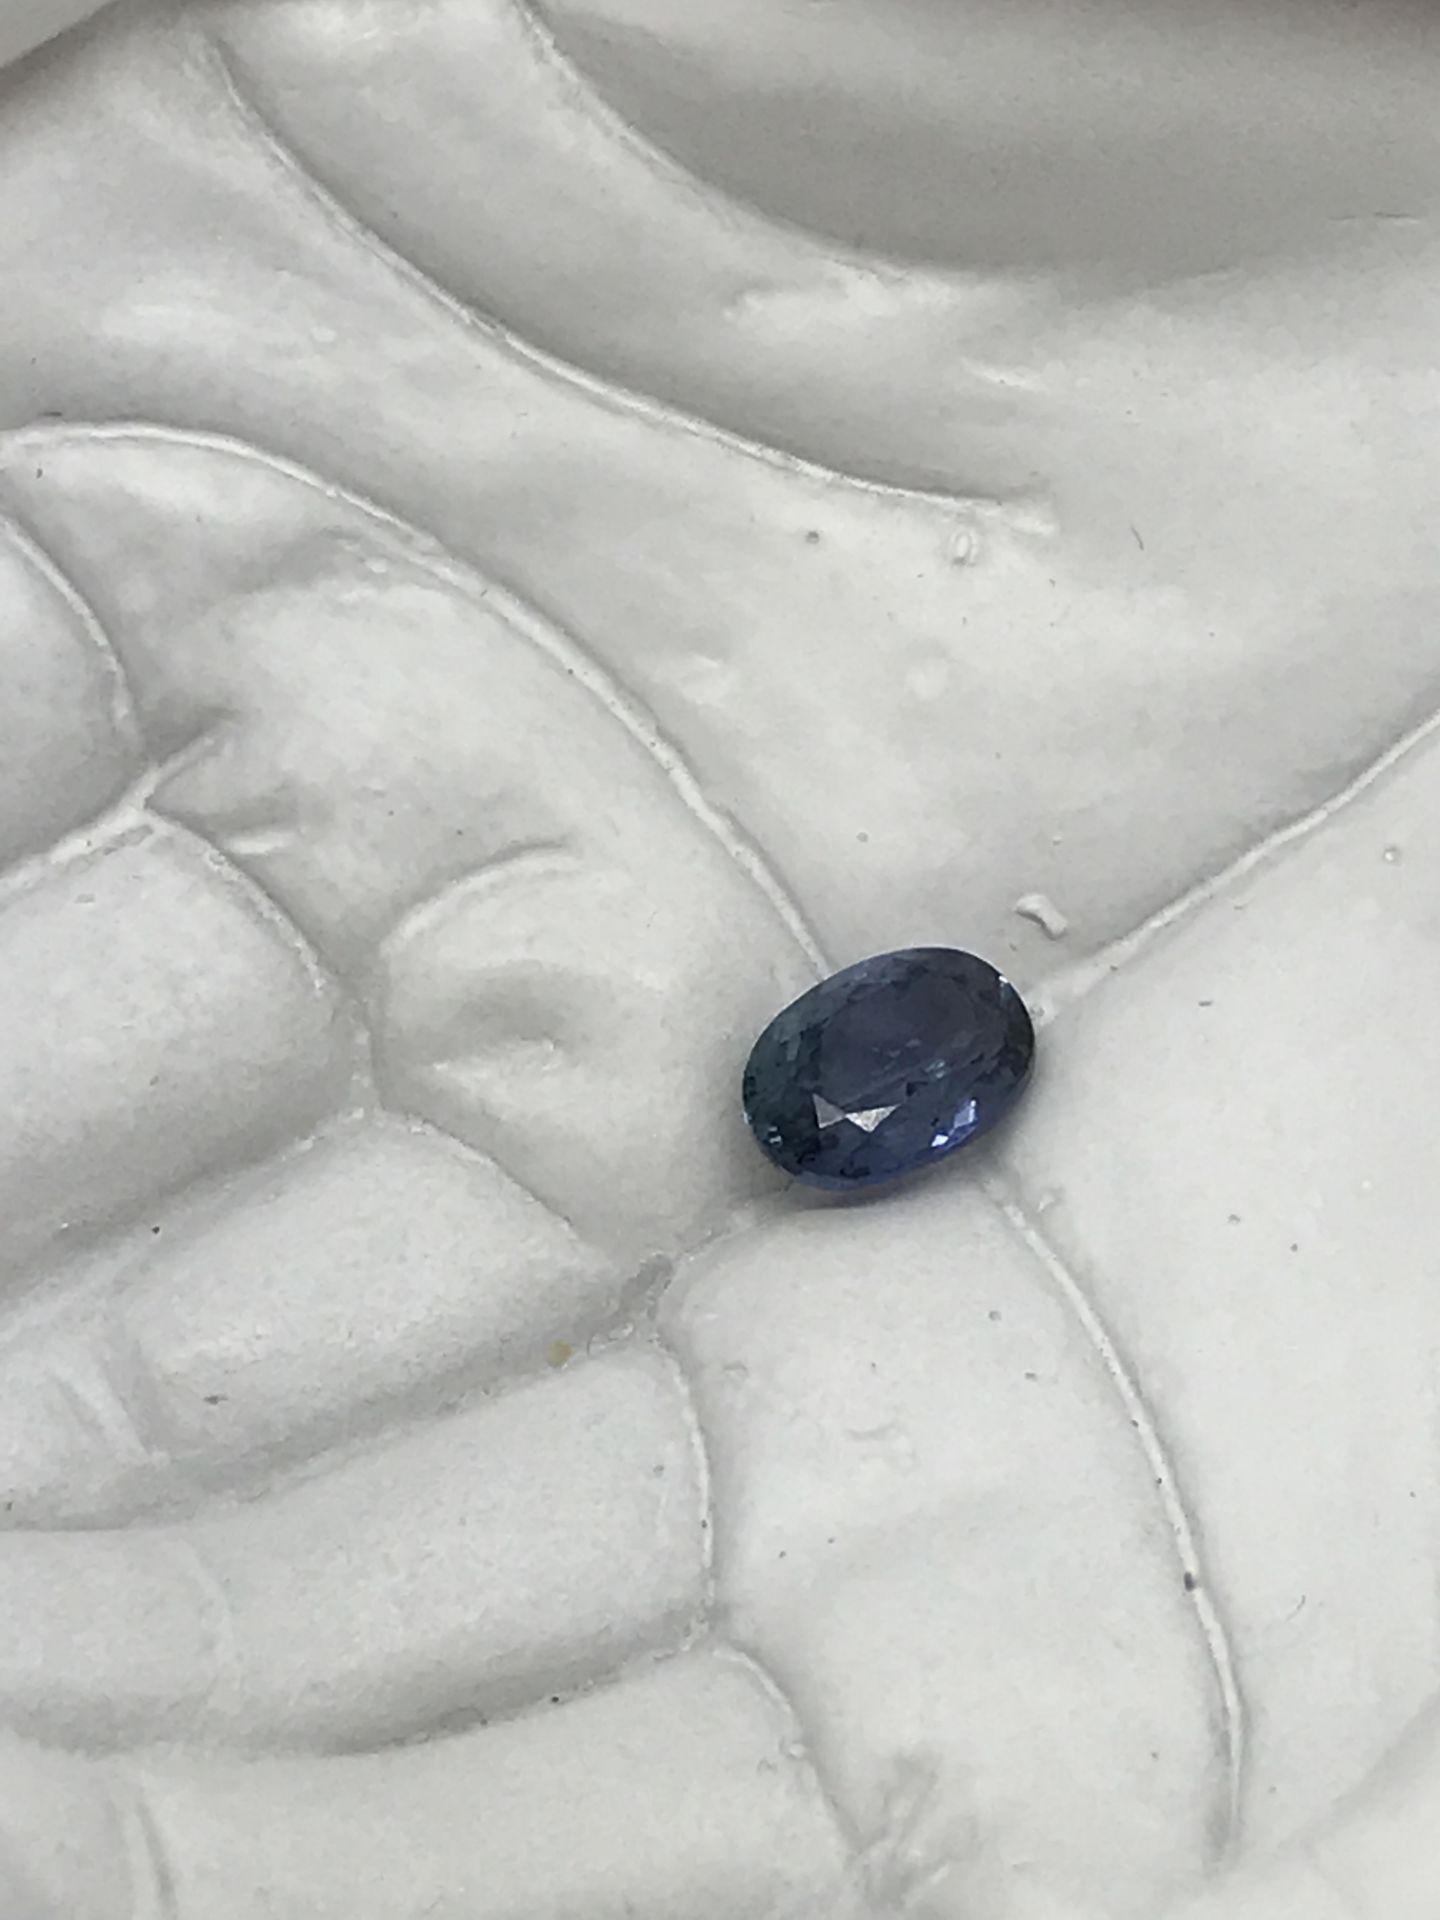 $600 REPLACEMENT VALUE GSL CERTIFICATE 3.21 CT NATURAL LOOSE TANZANITE - Image 3 of 5